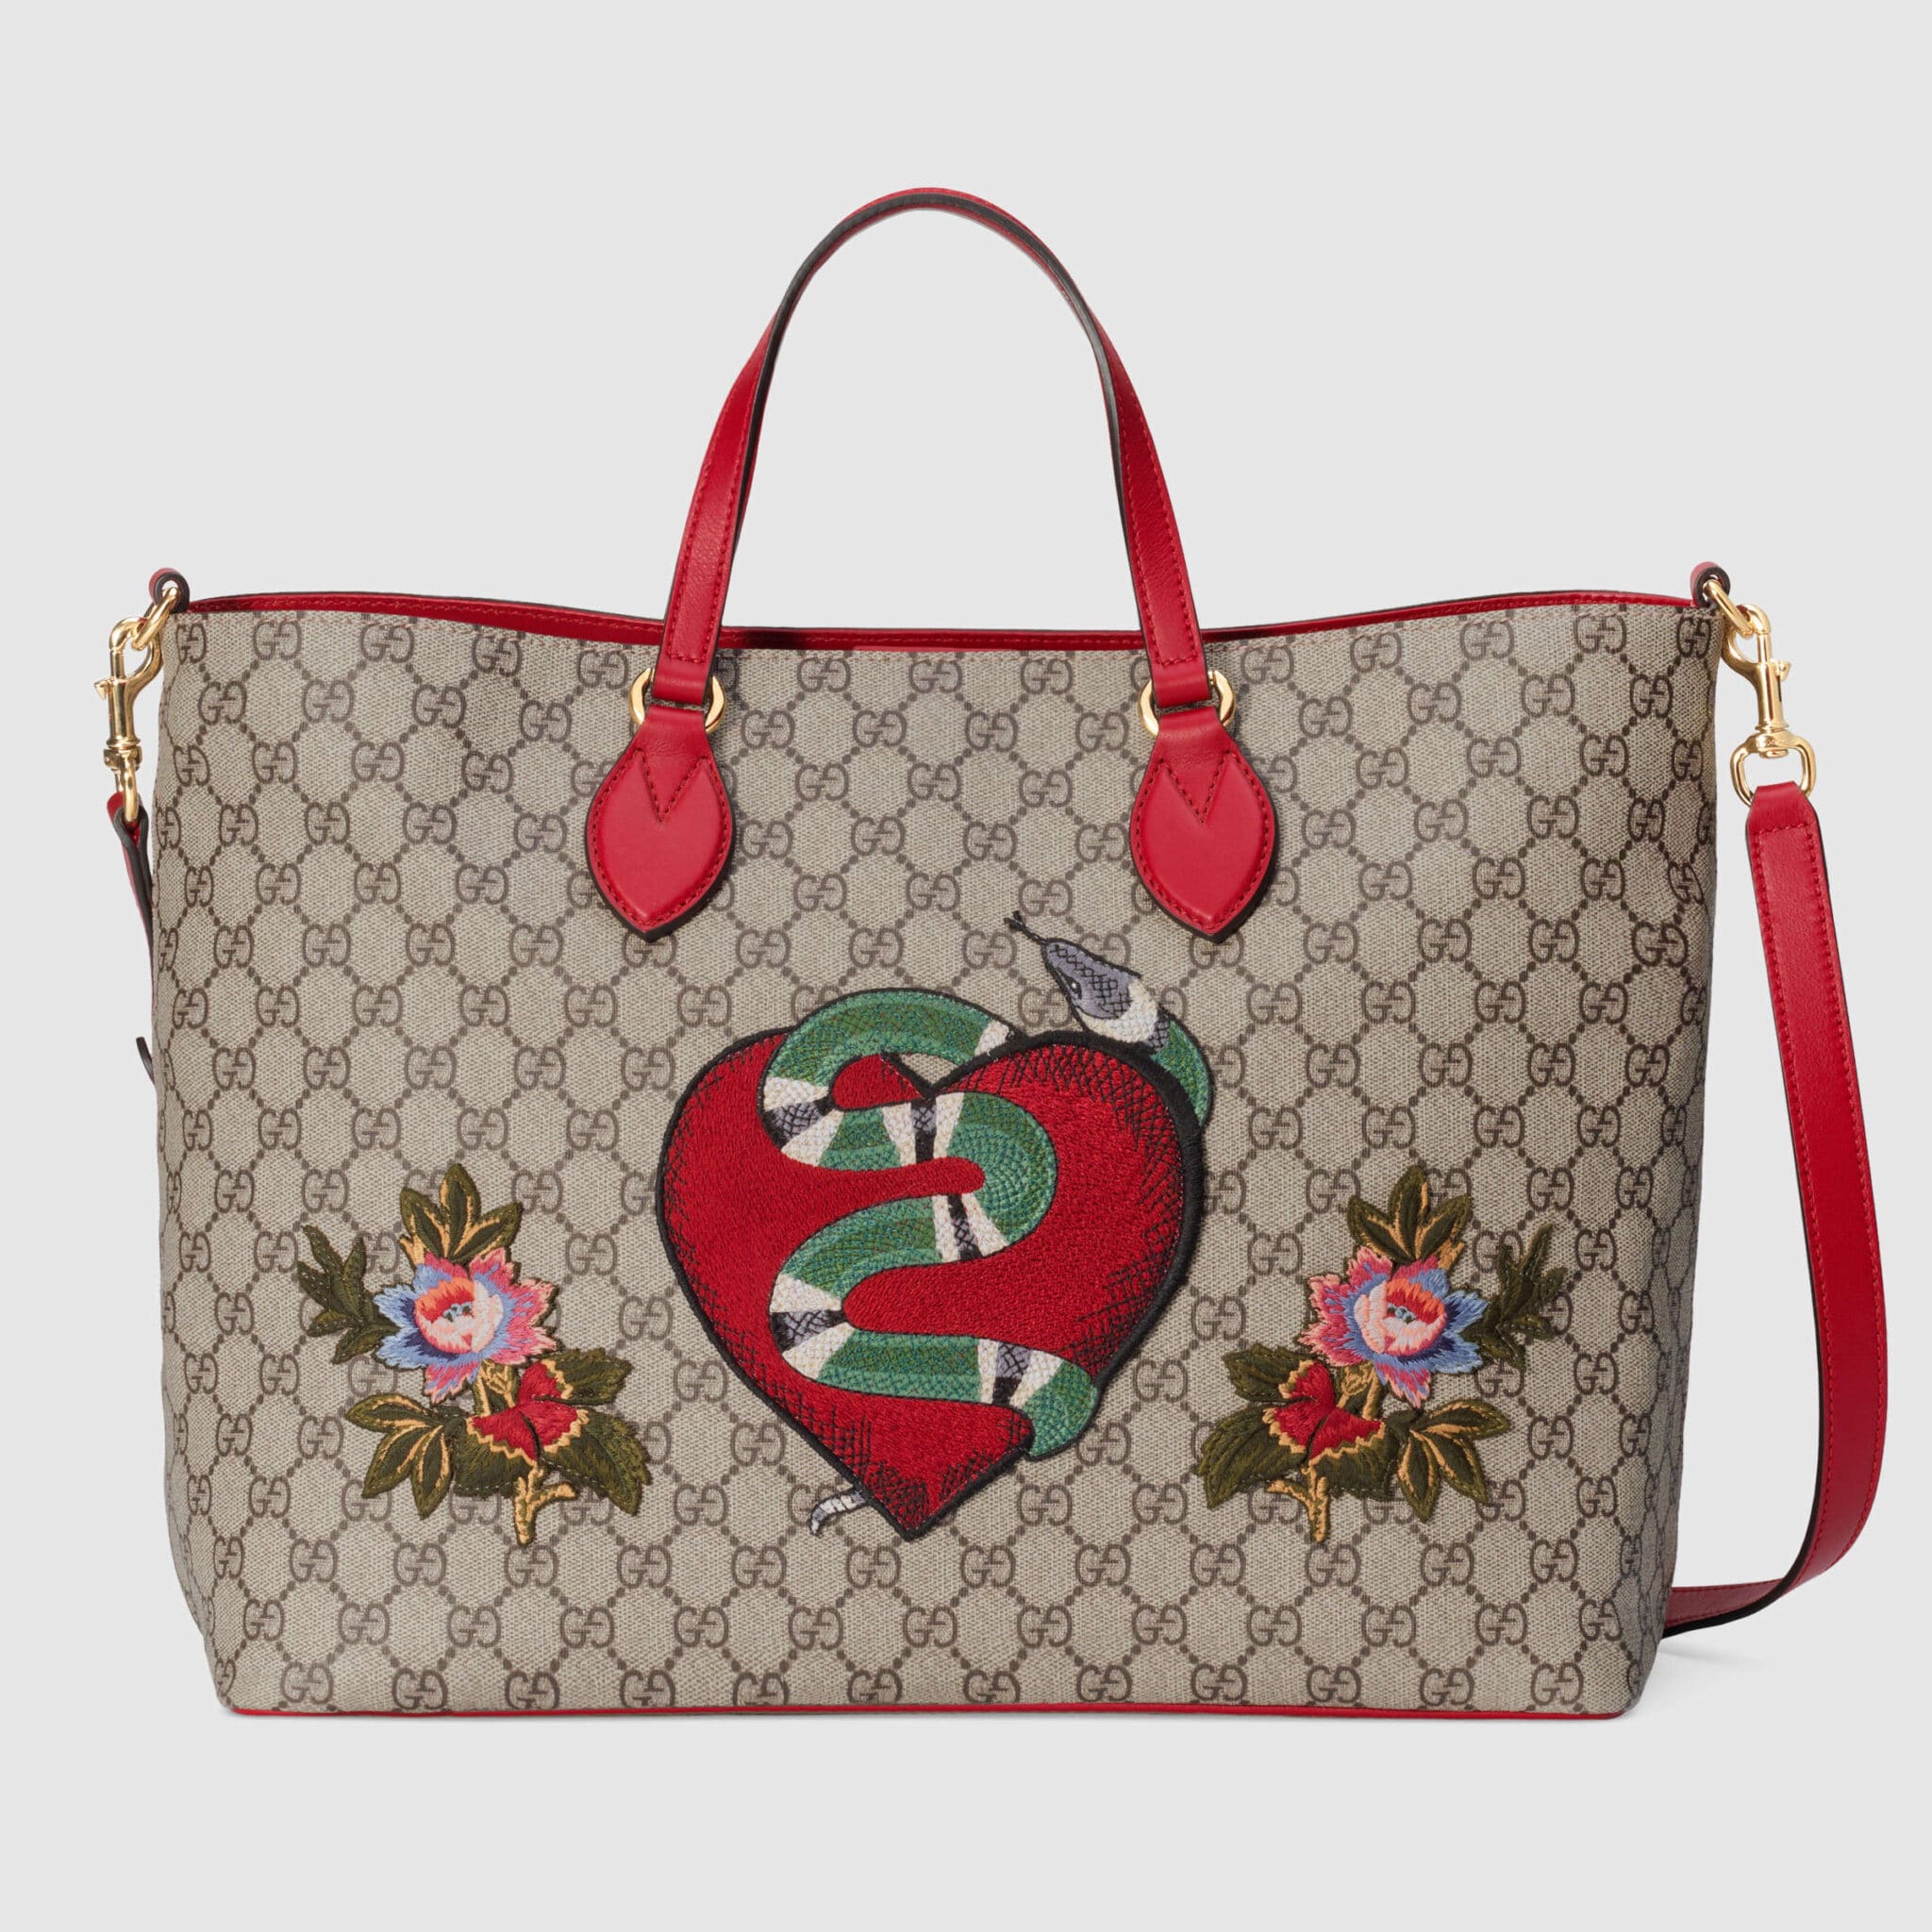 gucci limited edition 2018